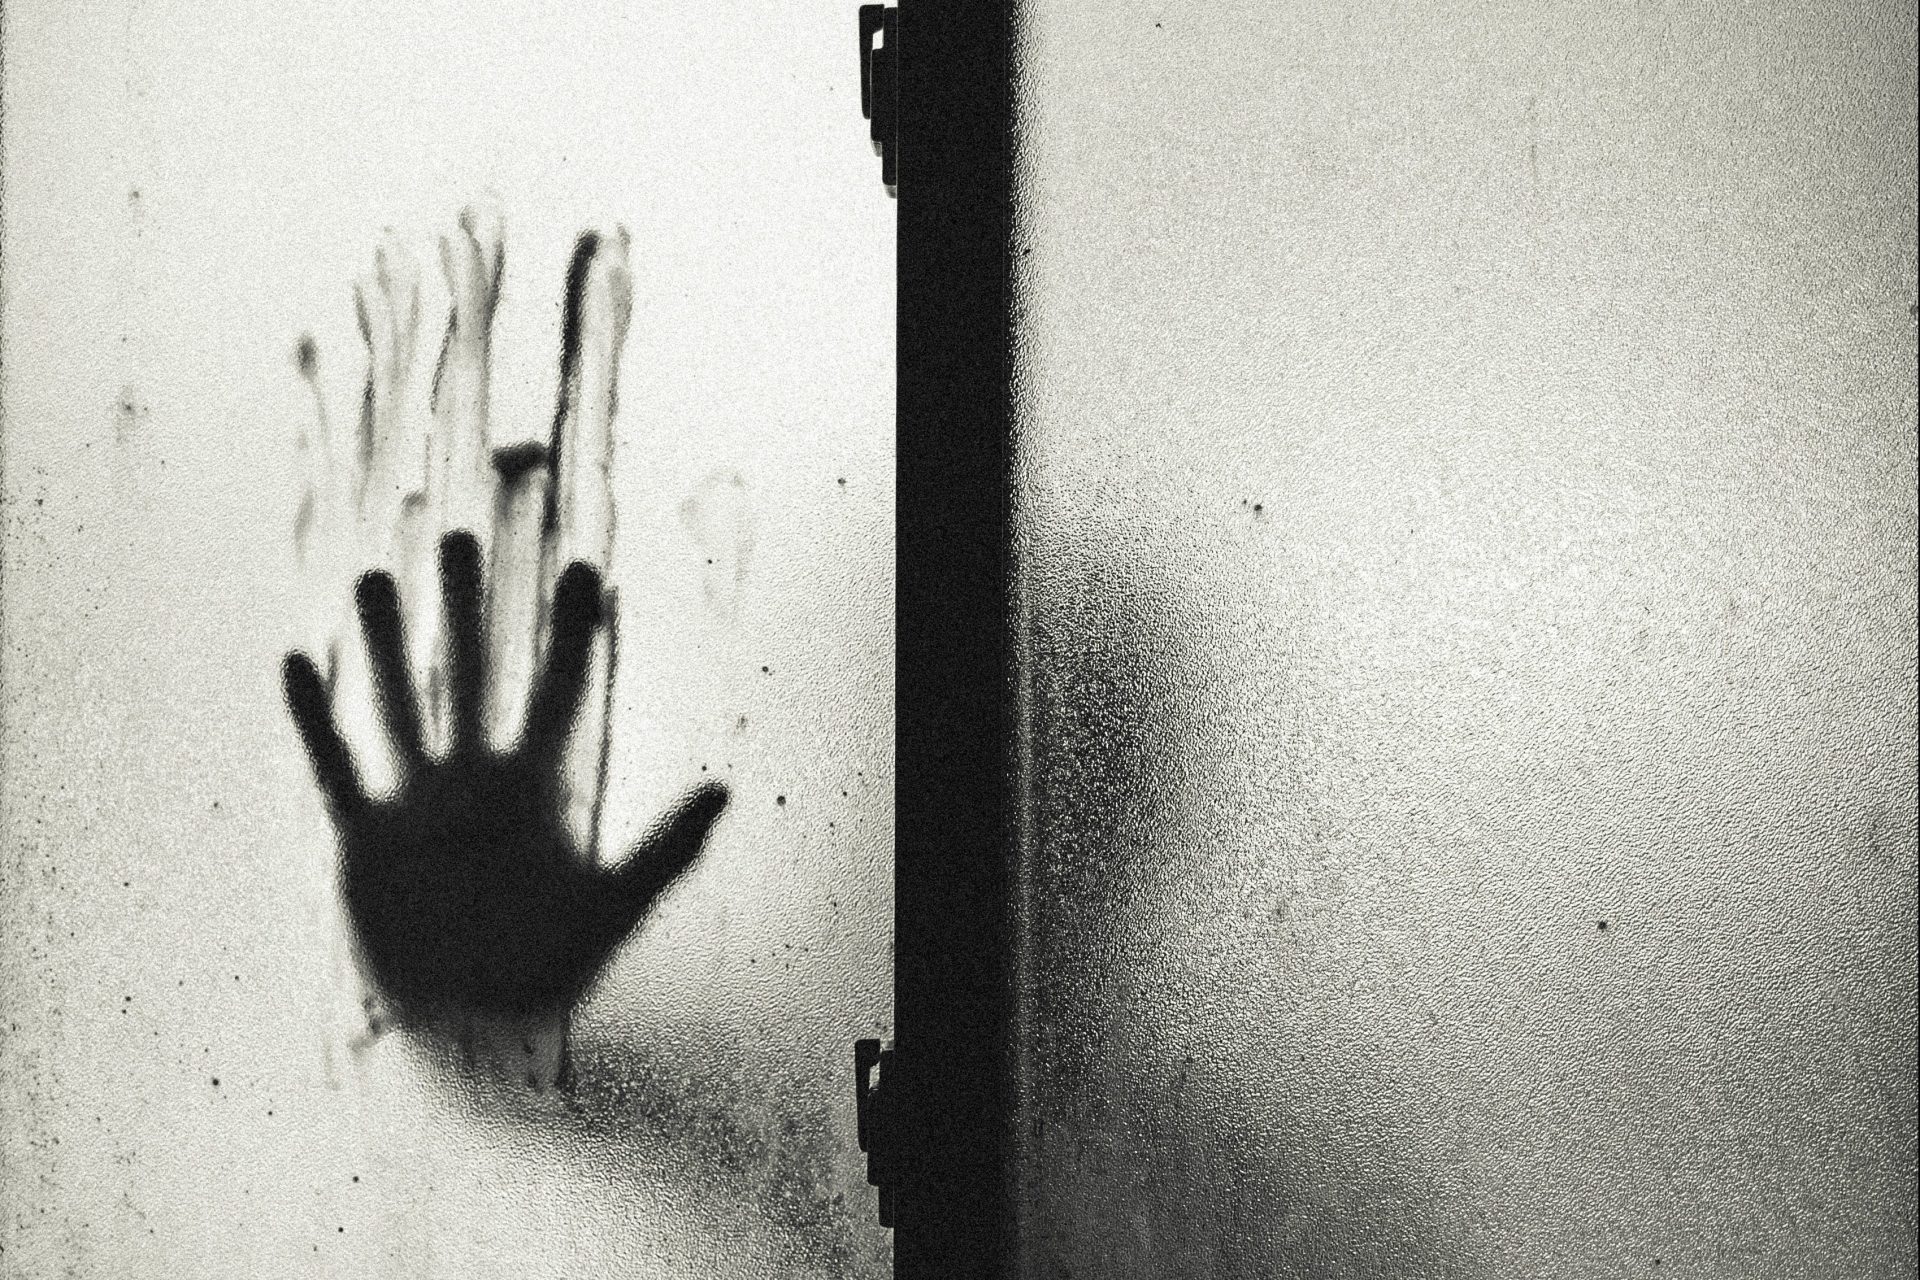 17 People Reveal Their Creepy Real Life Experiences With Murderers